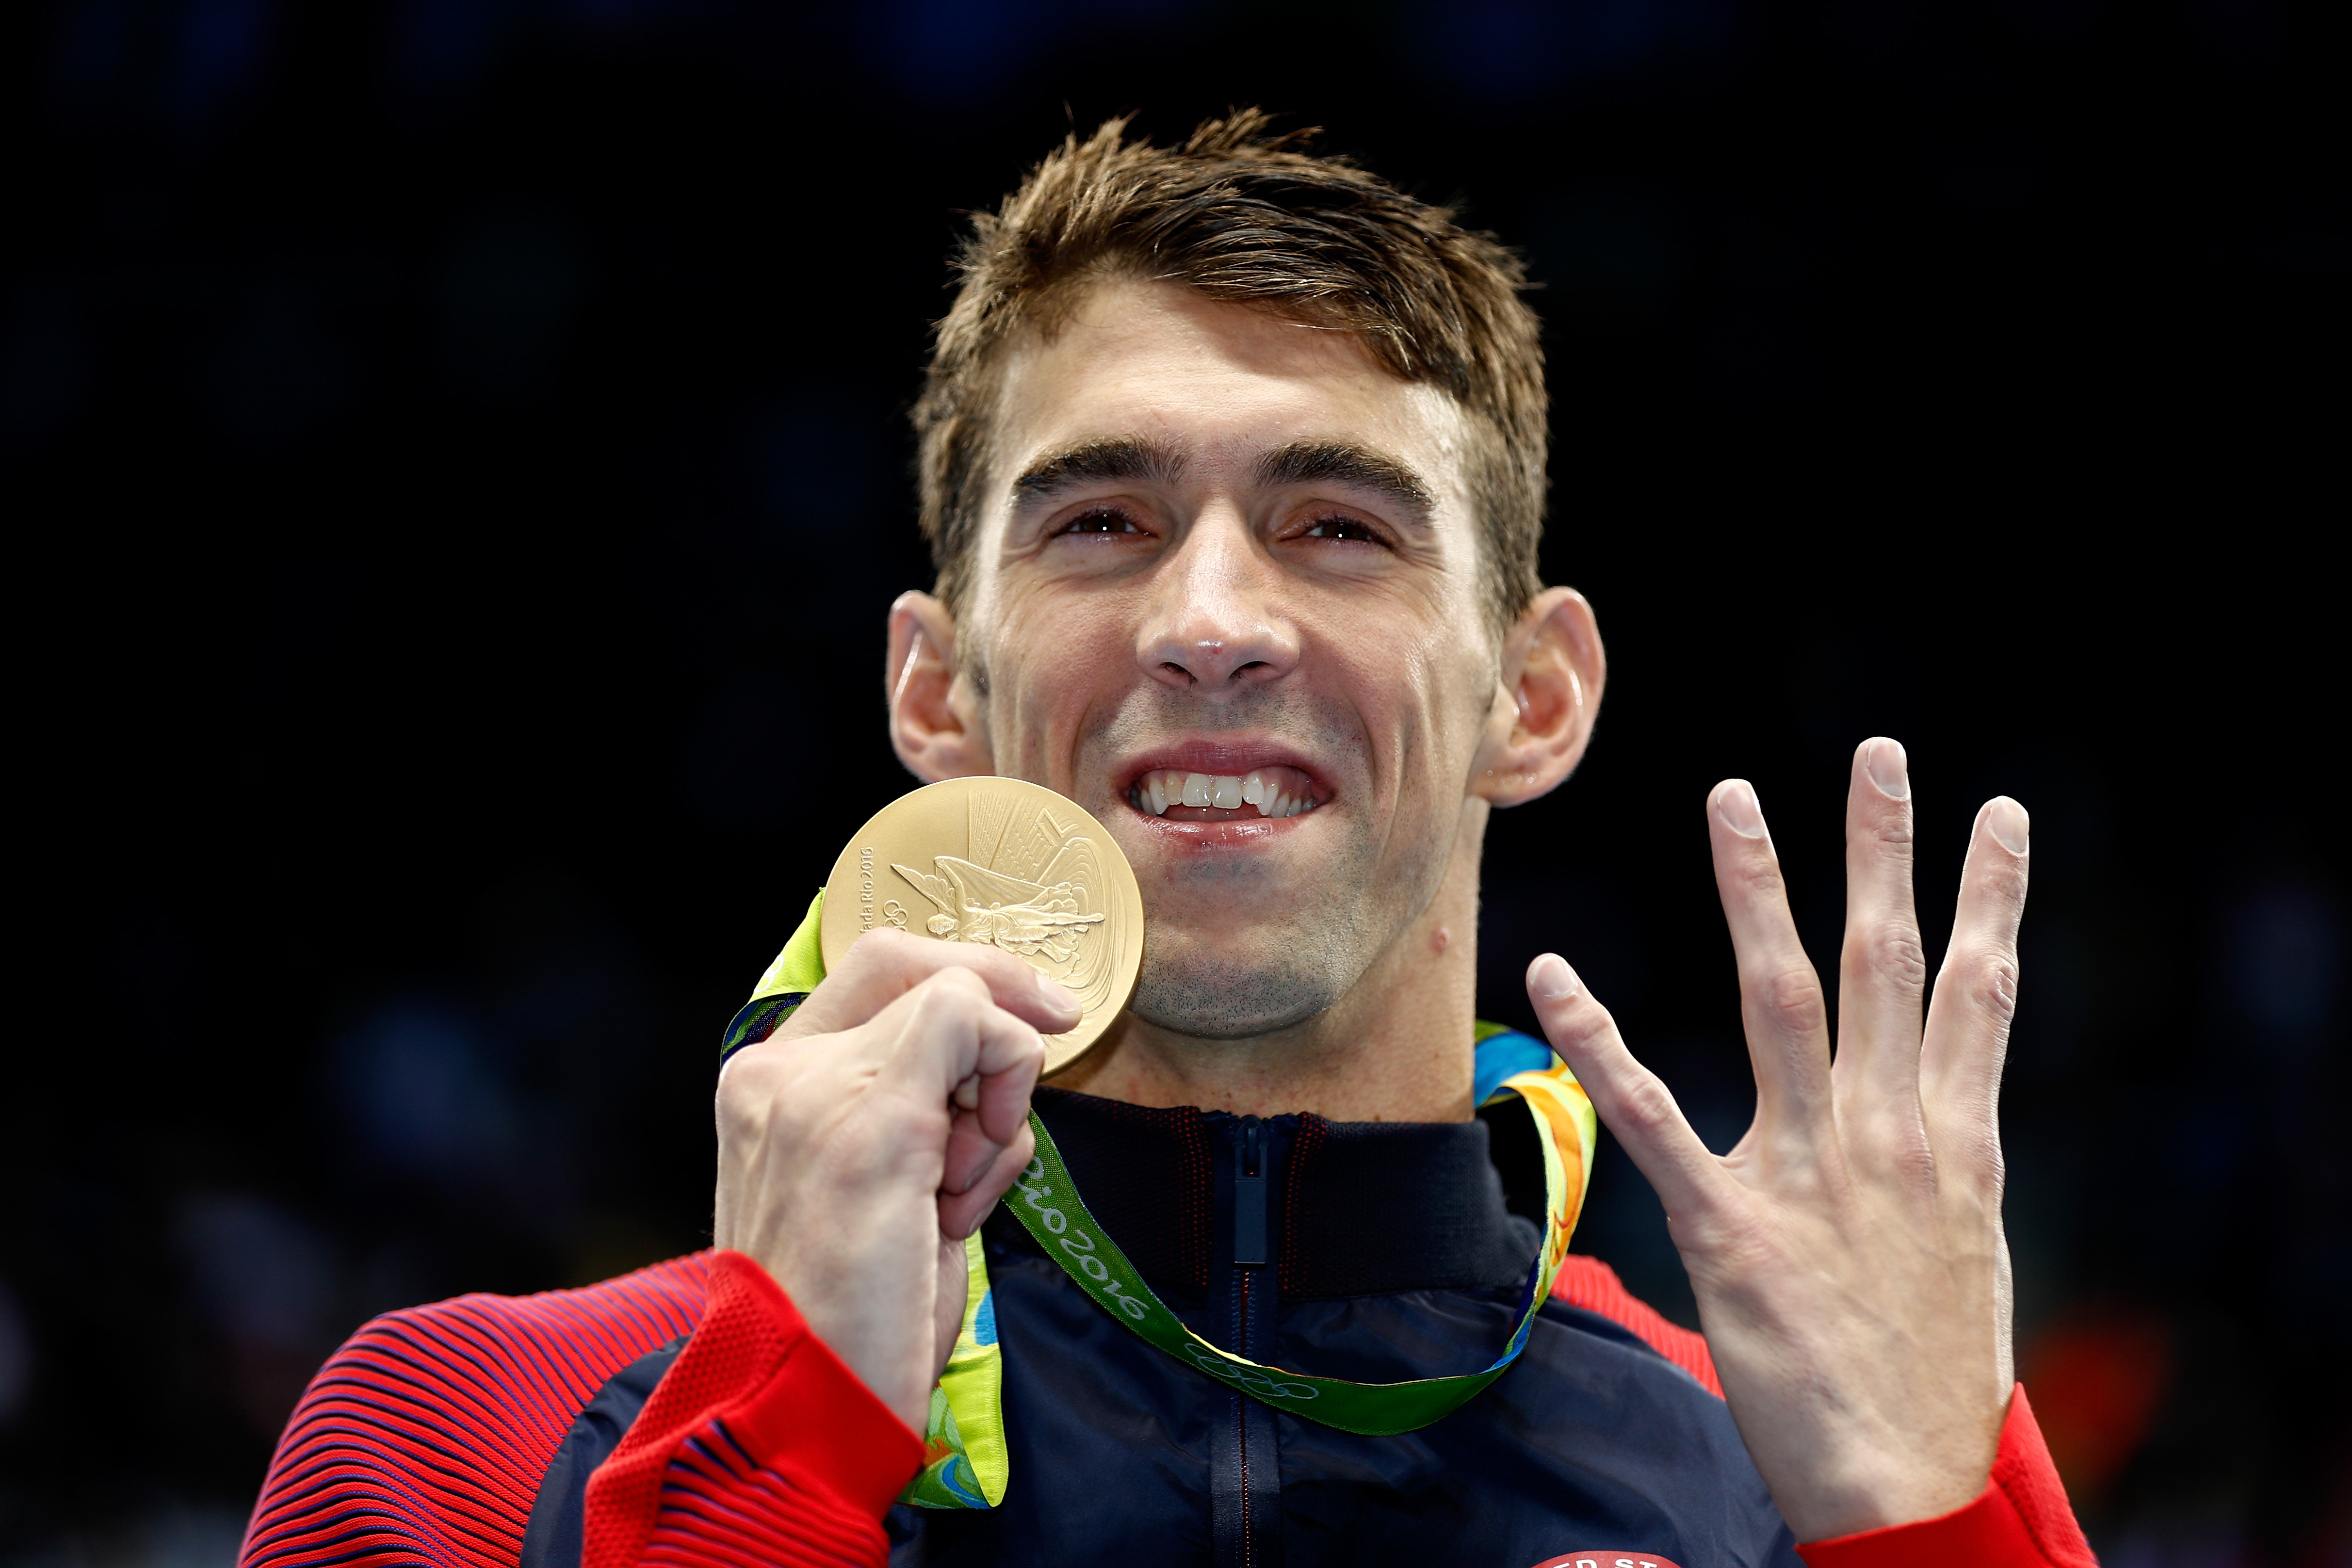 Michael Phelps joyously celebrates during the medal ceremony for the Men's 200m Individual Medley Final on Day 6 of the Rio 2016 Olympic Games at the Olympic Aquatics Stadium in Rio de Janeiro, Brazil | Source: Getty Images